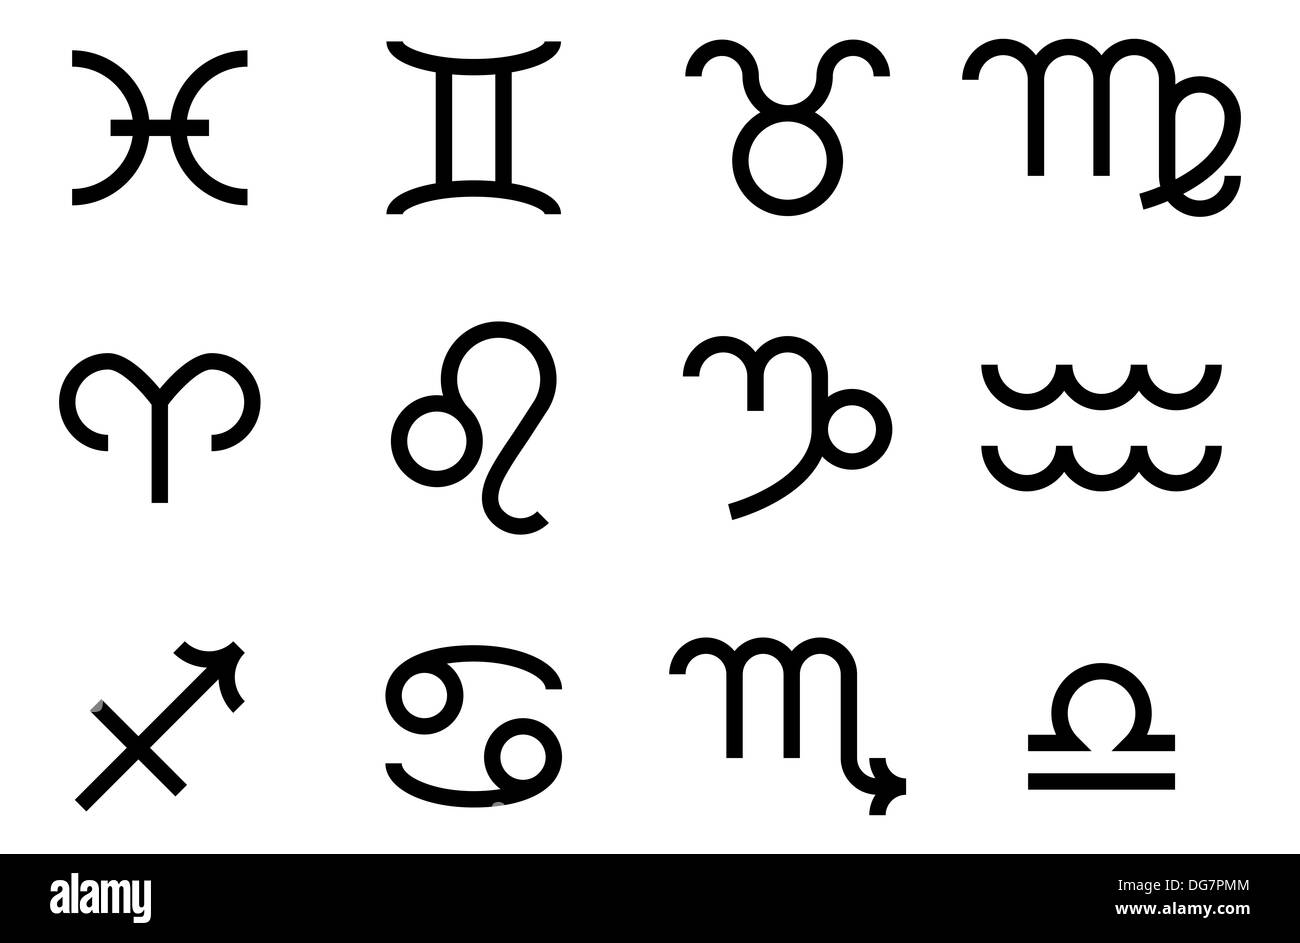 A set of zodiac sign icons representing the twelve signs of the zodiac for horoscopes and the like Stock Photo